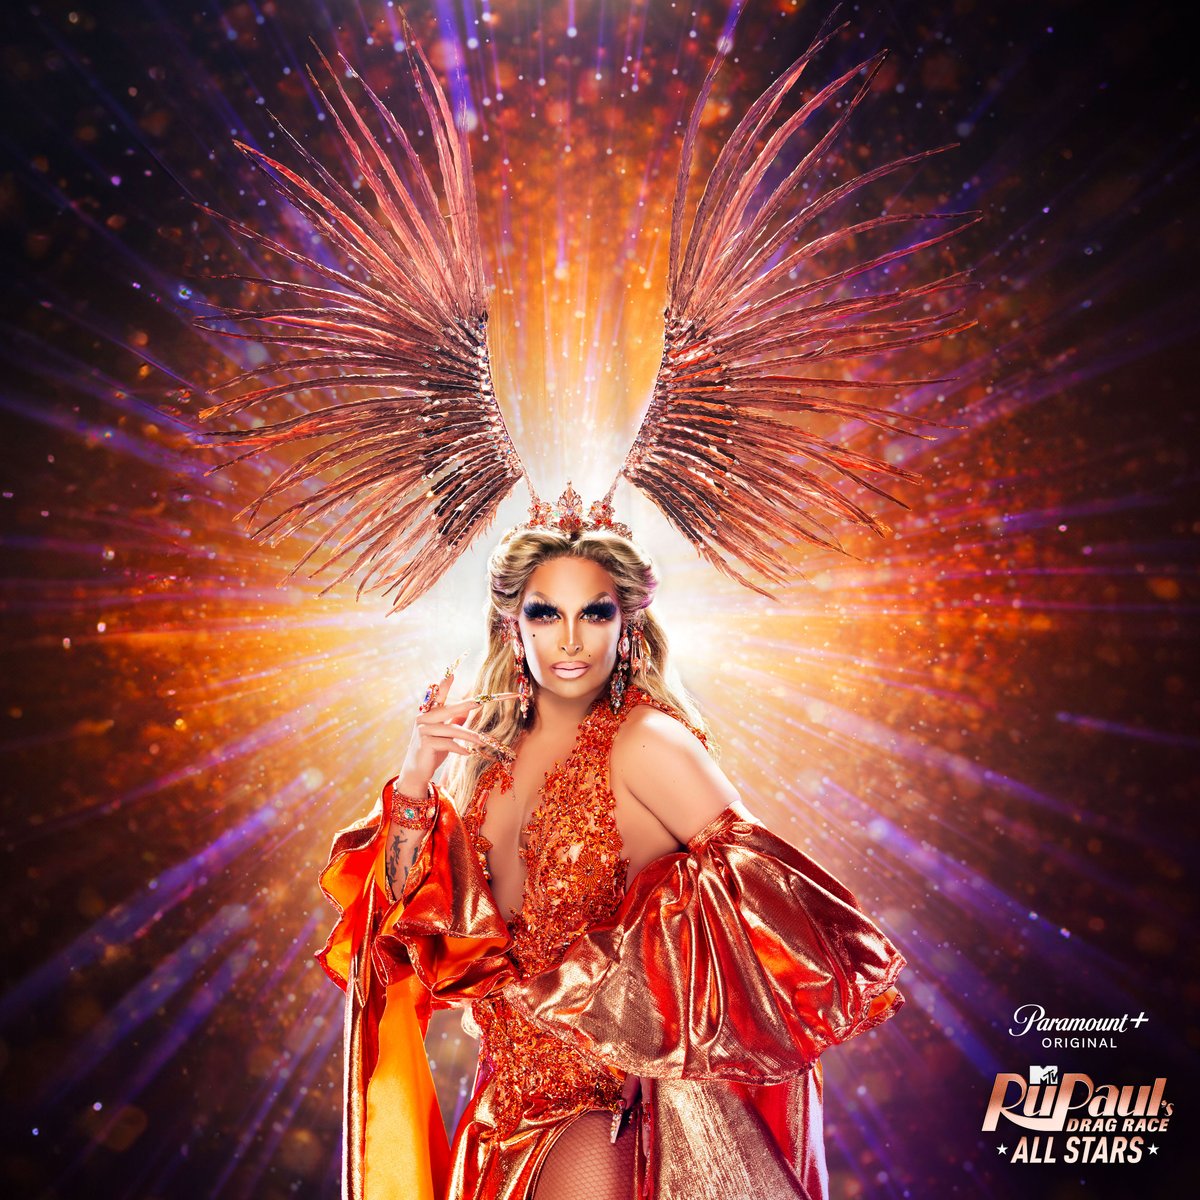 She's here to make it clear! 🤭 @RoxxxyAndrews is back for #AllStars9 – streaming FRI MAY 17 on @paramountplus! ✨